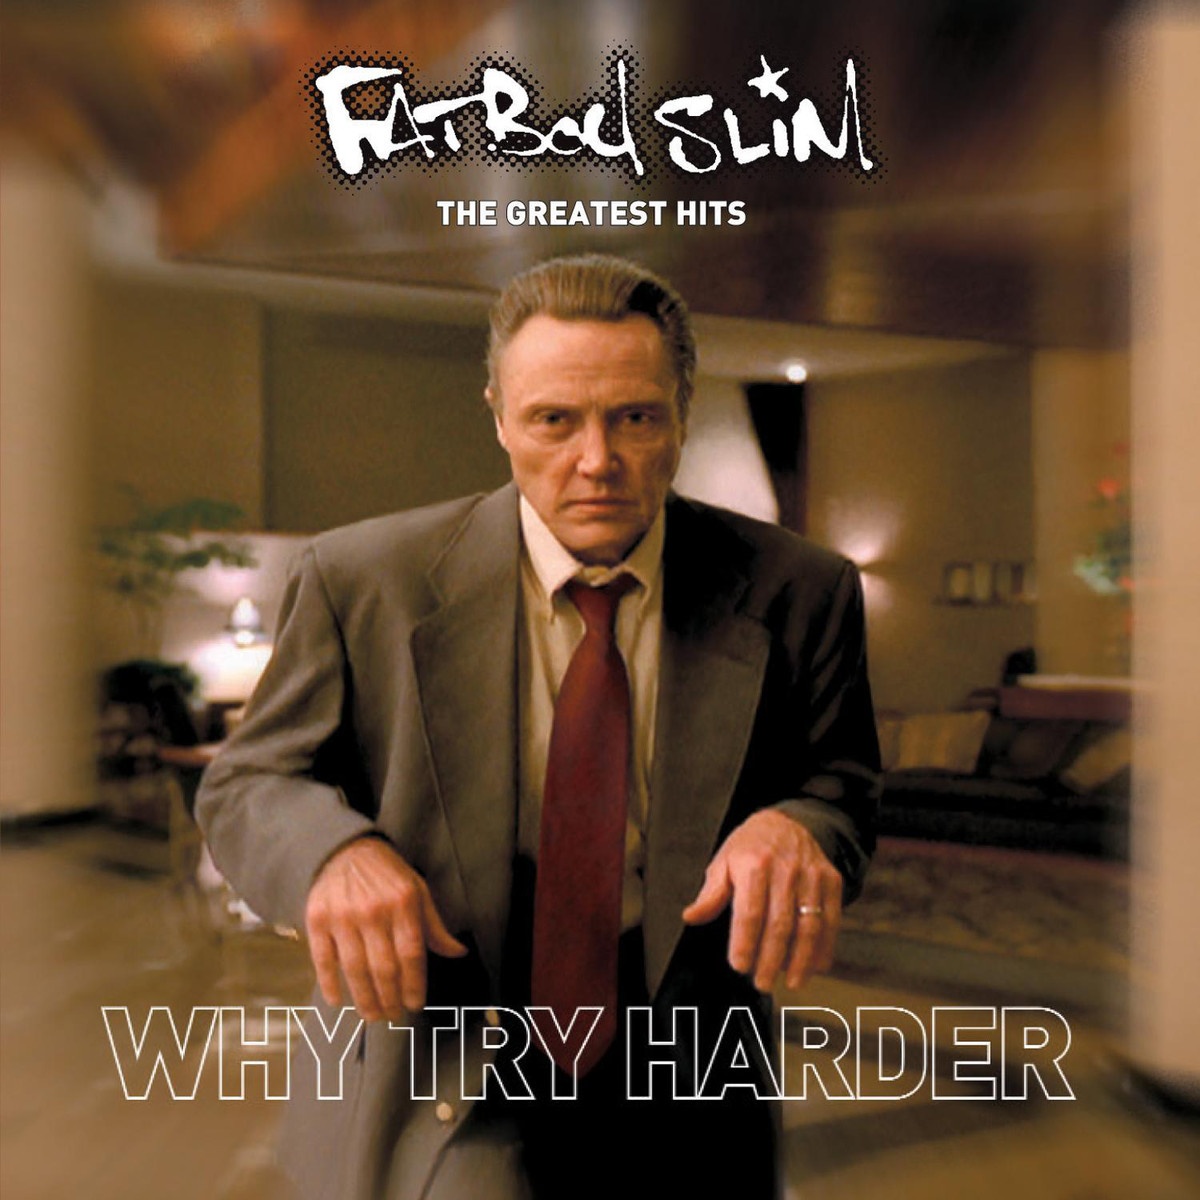 The Greatest Hits - Why Try Harder